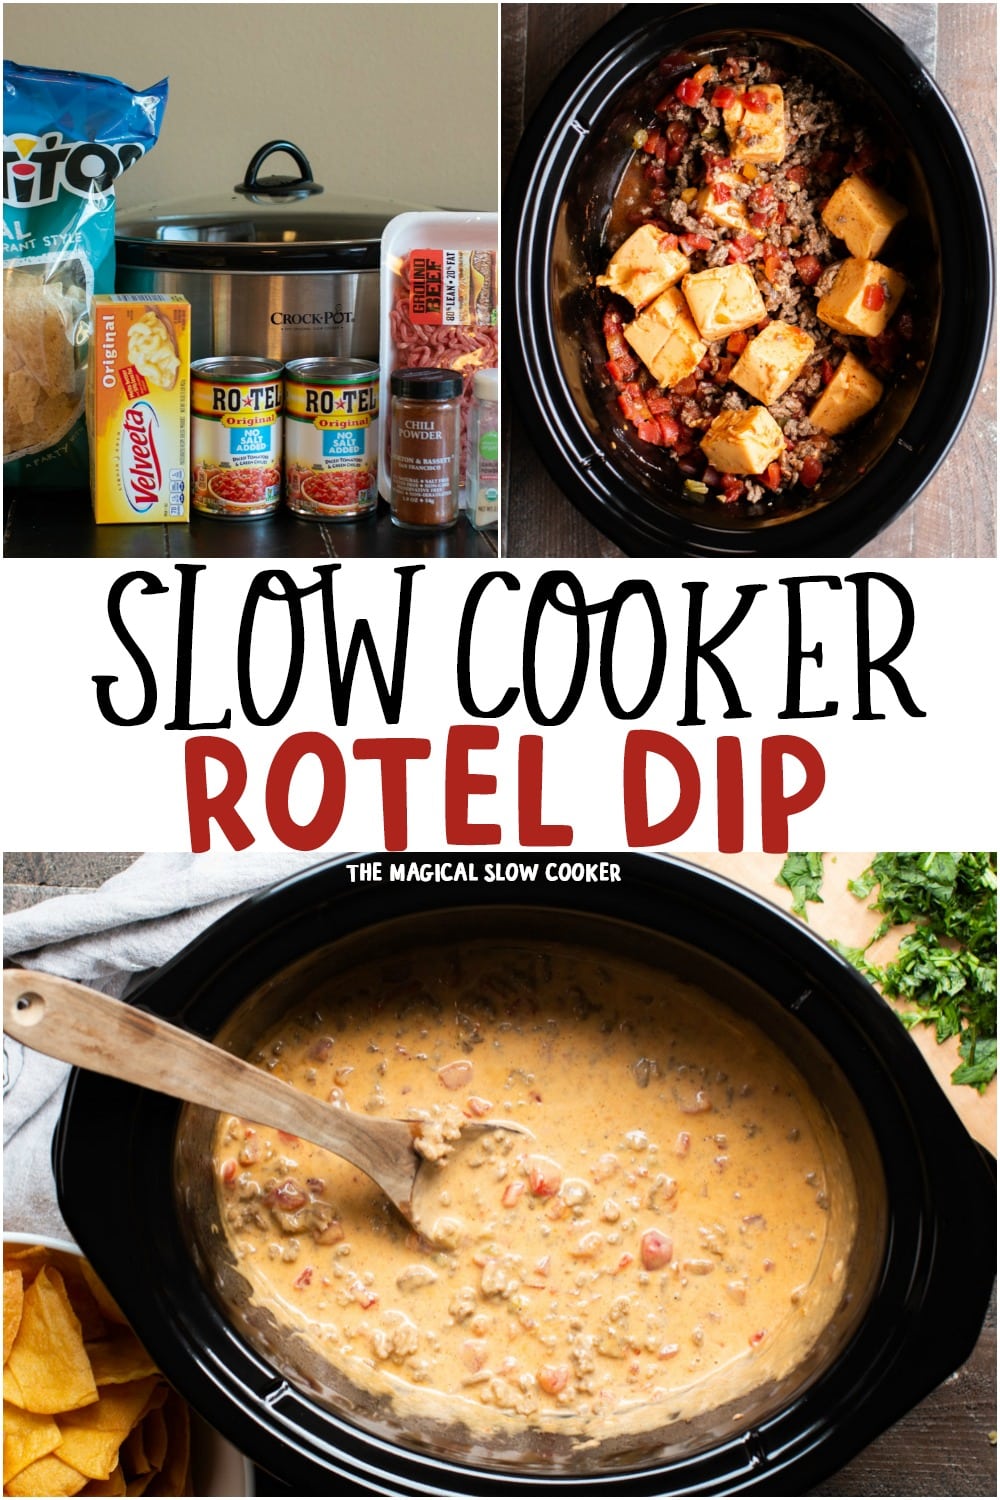 Slow Cooker Rotel Dip with Beef - The Magical Slow Cooker